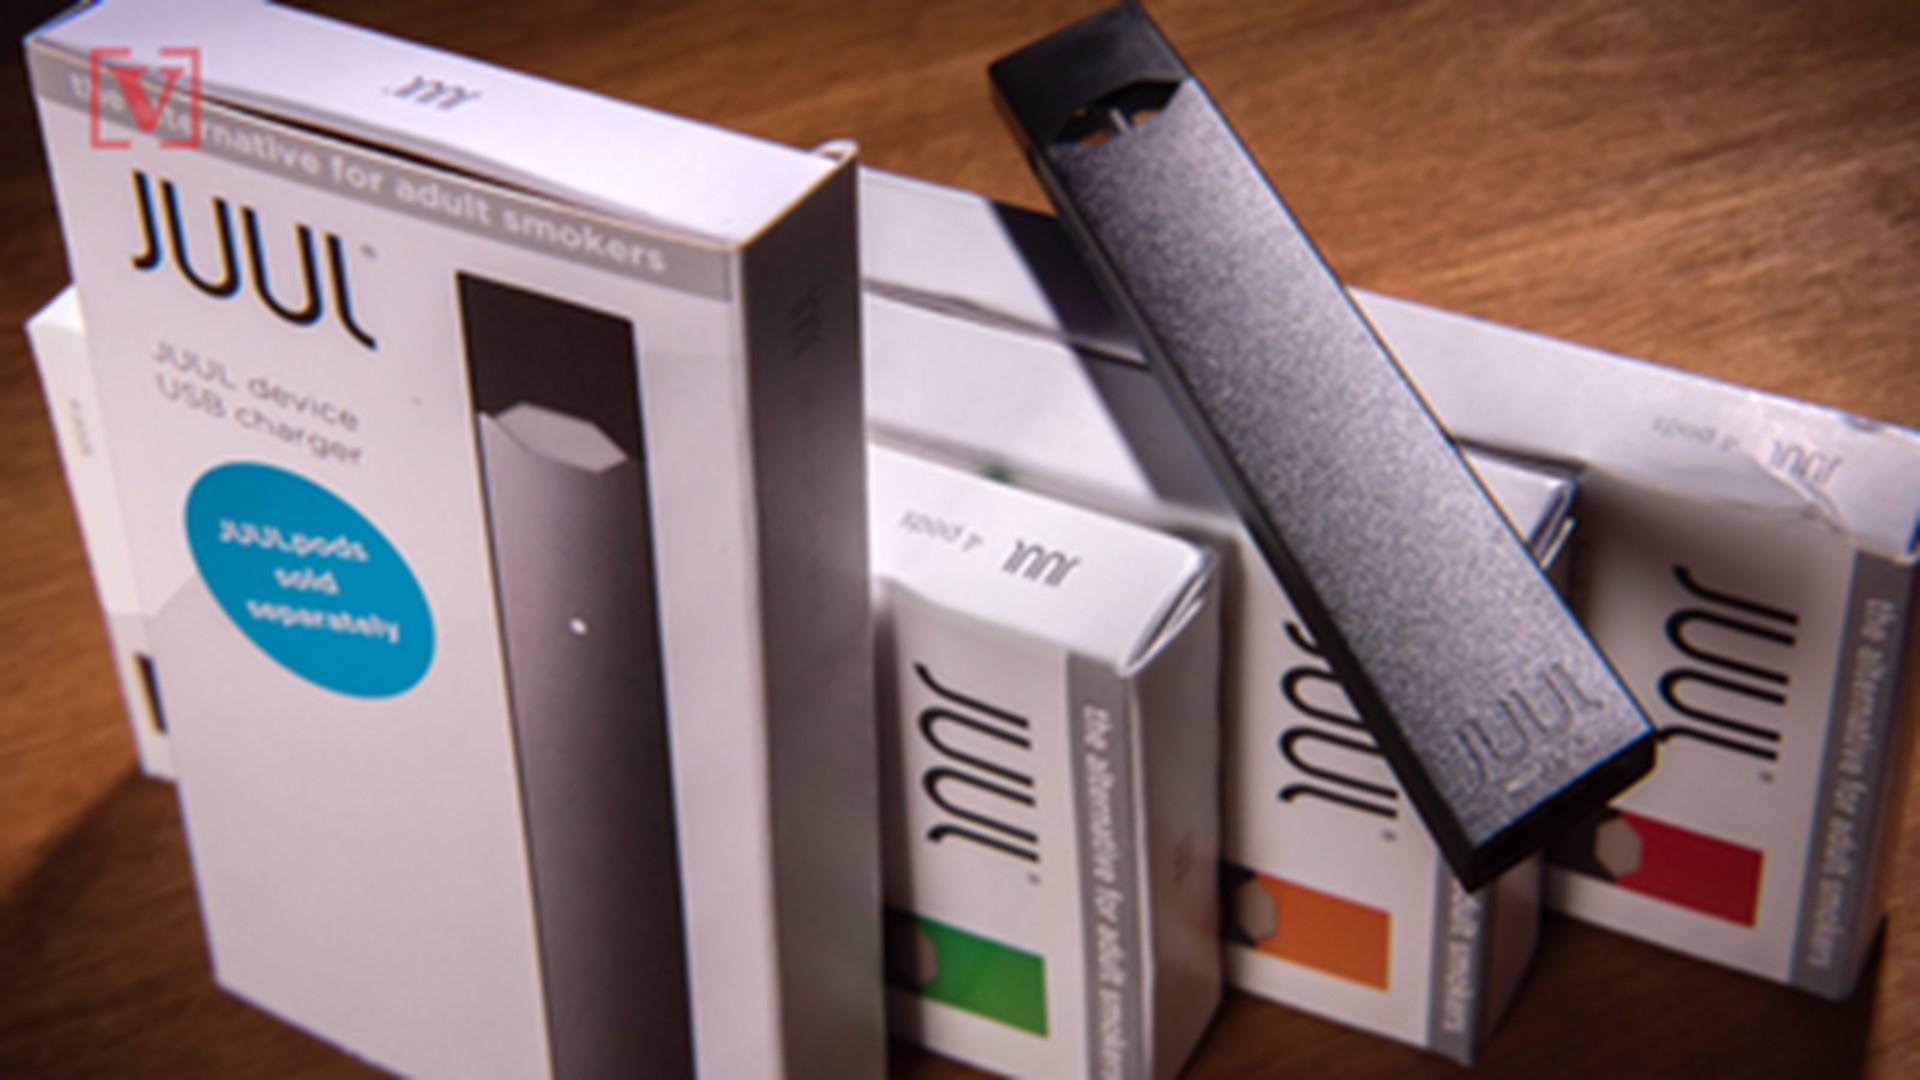 The man behind the Juul is now apologizing for teenagers' addiction. Nathan Rousseau Smith has the story.